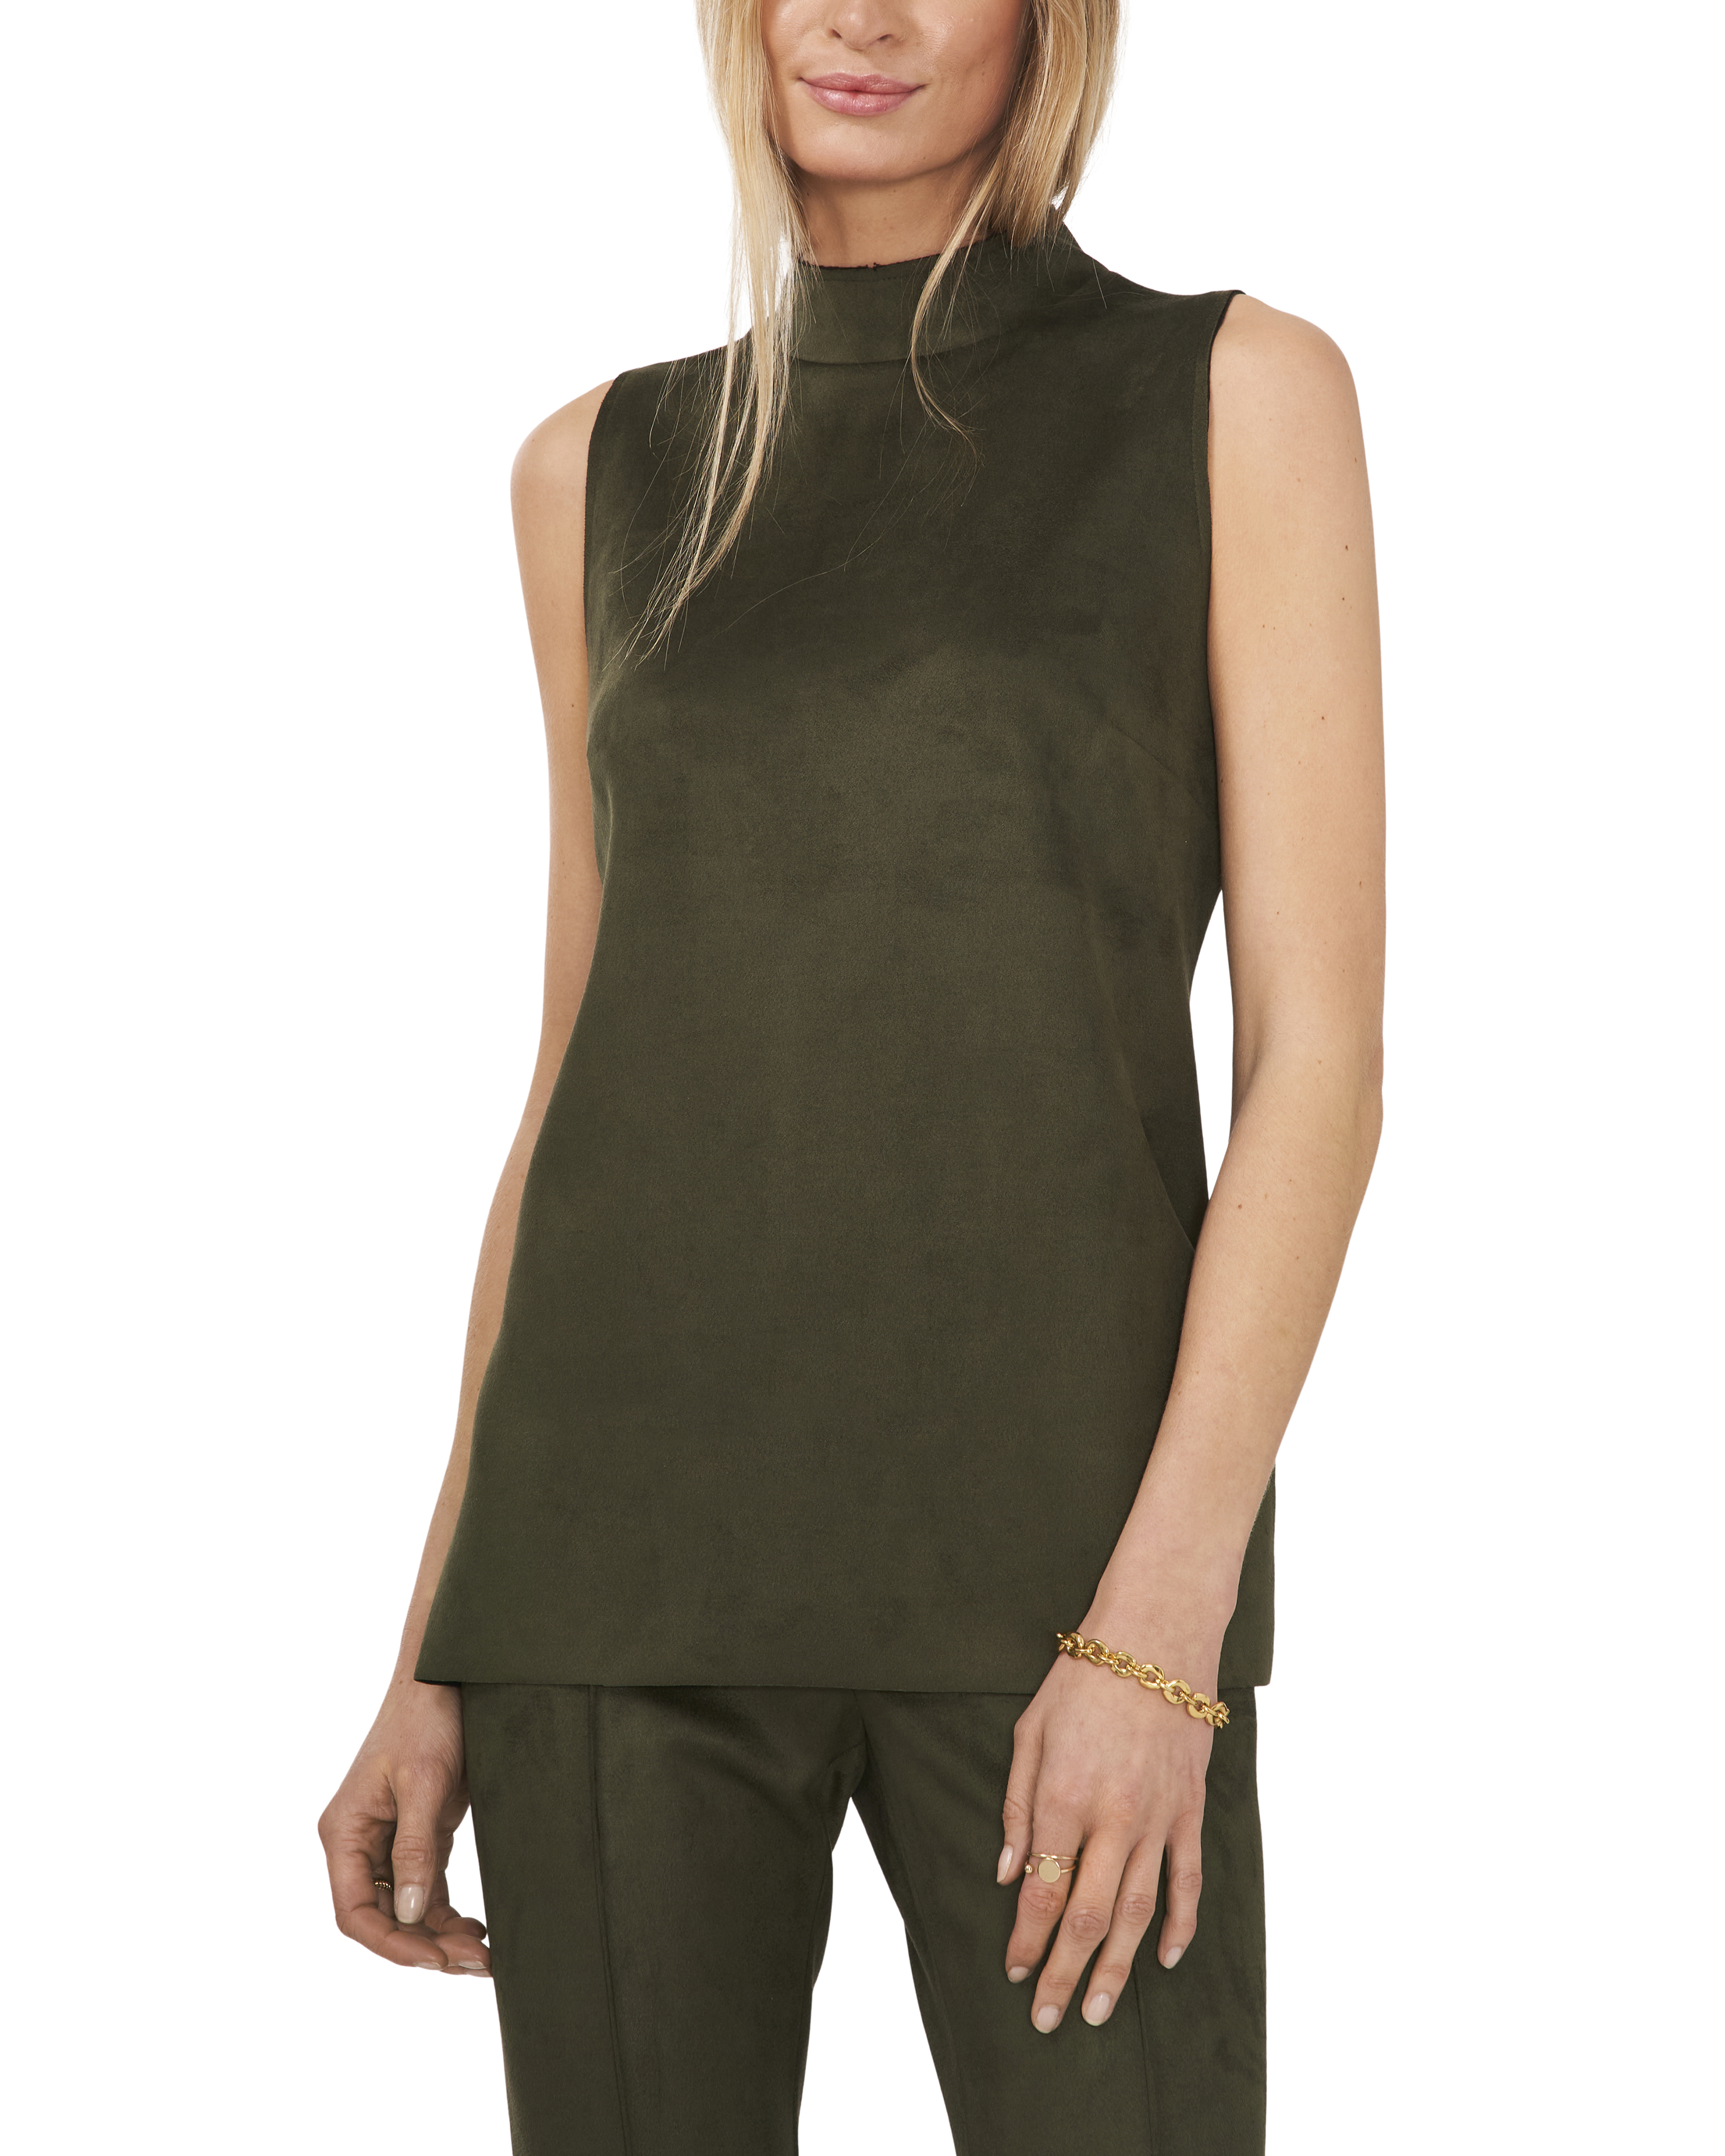 Women's Tops - Designer Fashion Women's Tops by Vince Camuto | Vince Camuto